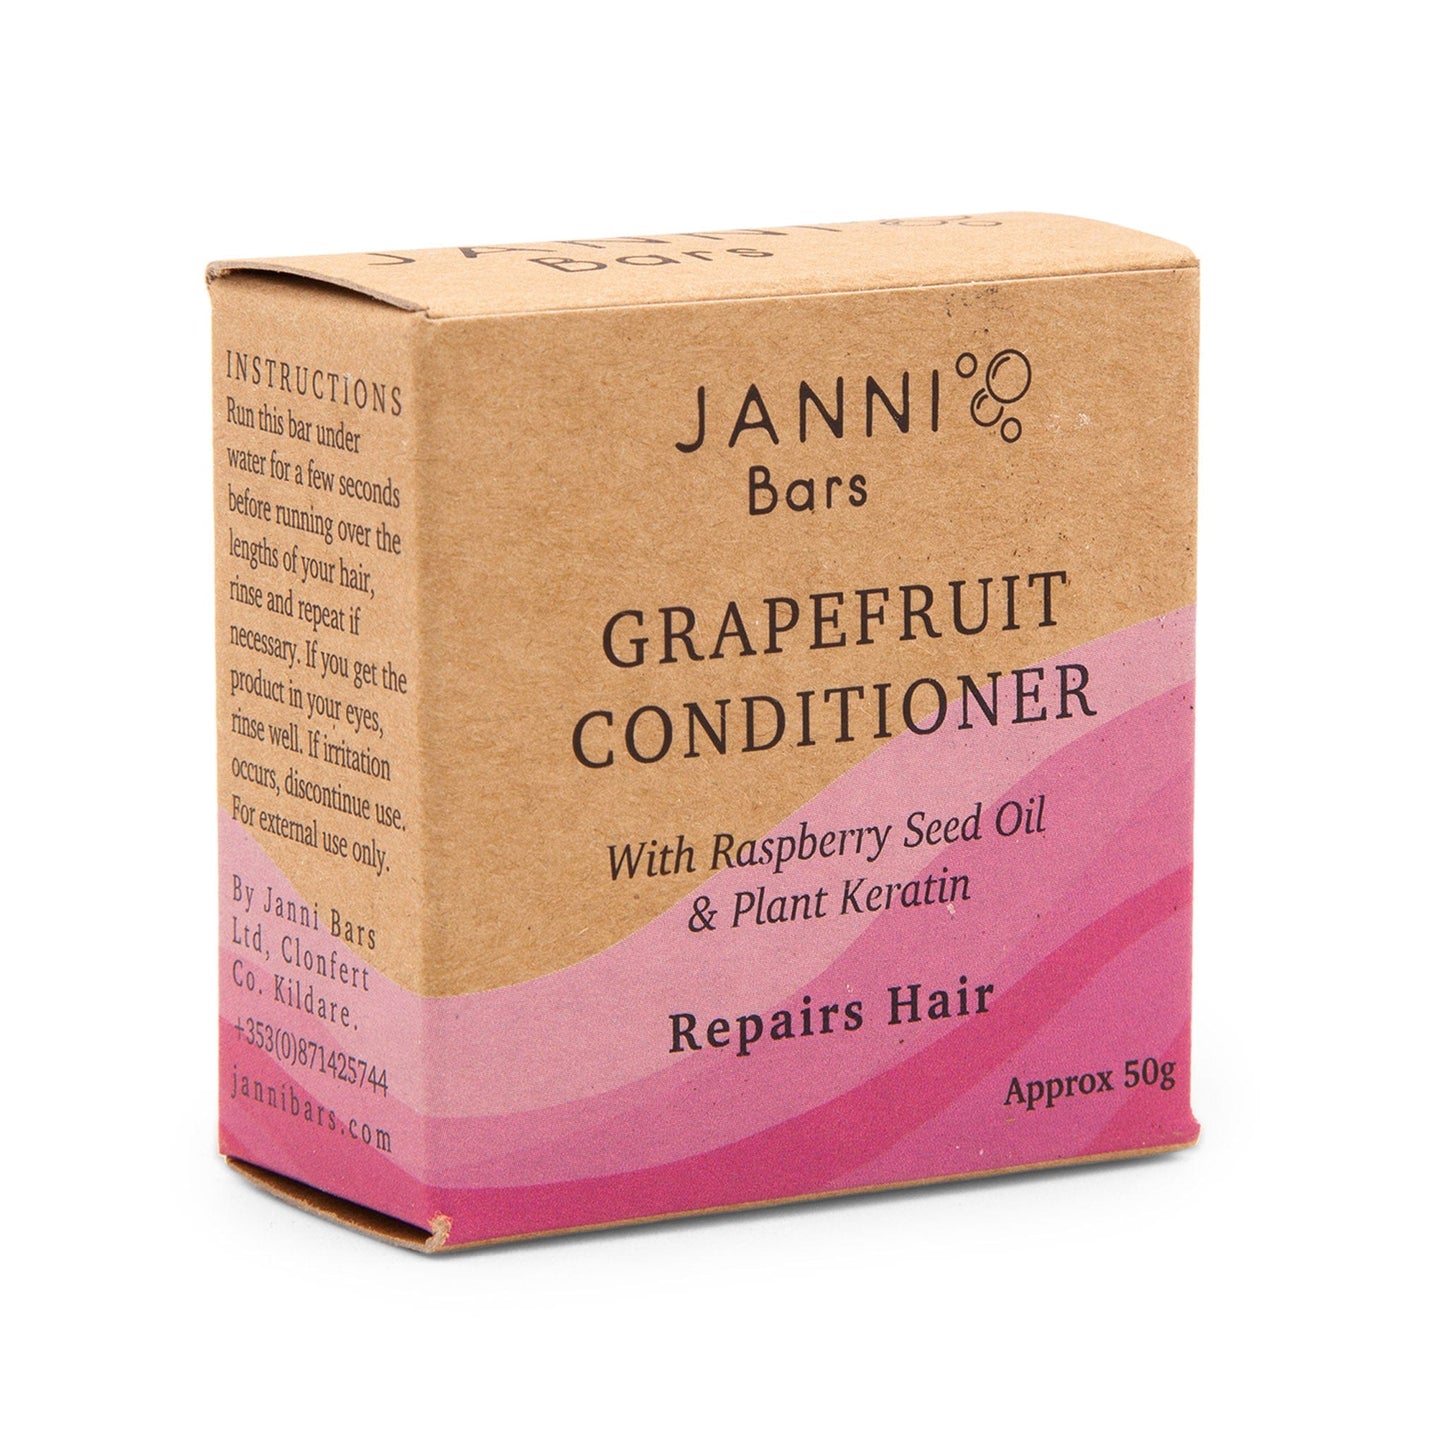 Janni Bars Conditioner Hair Repair Conditioner Bar with Pink Grapefruit, Raspberry Seed Oil & Plant Keratin - Janni Bars